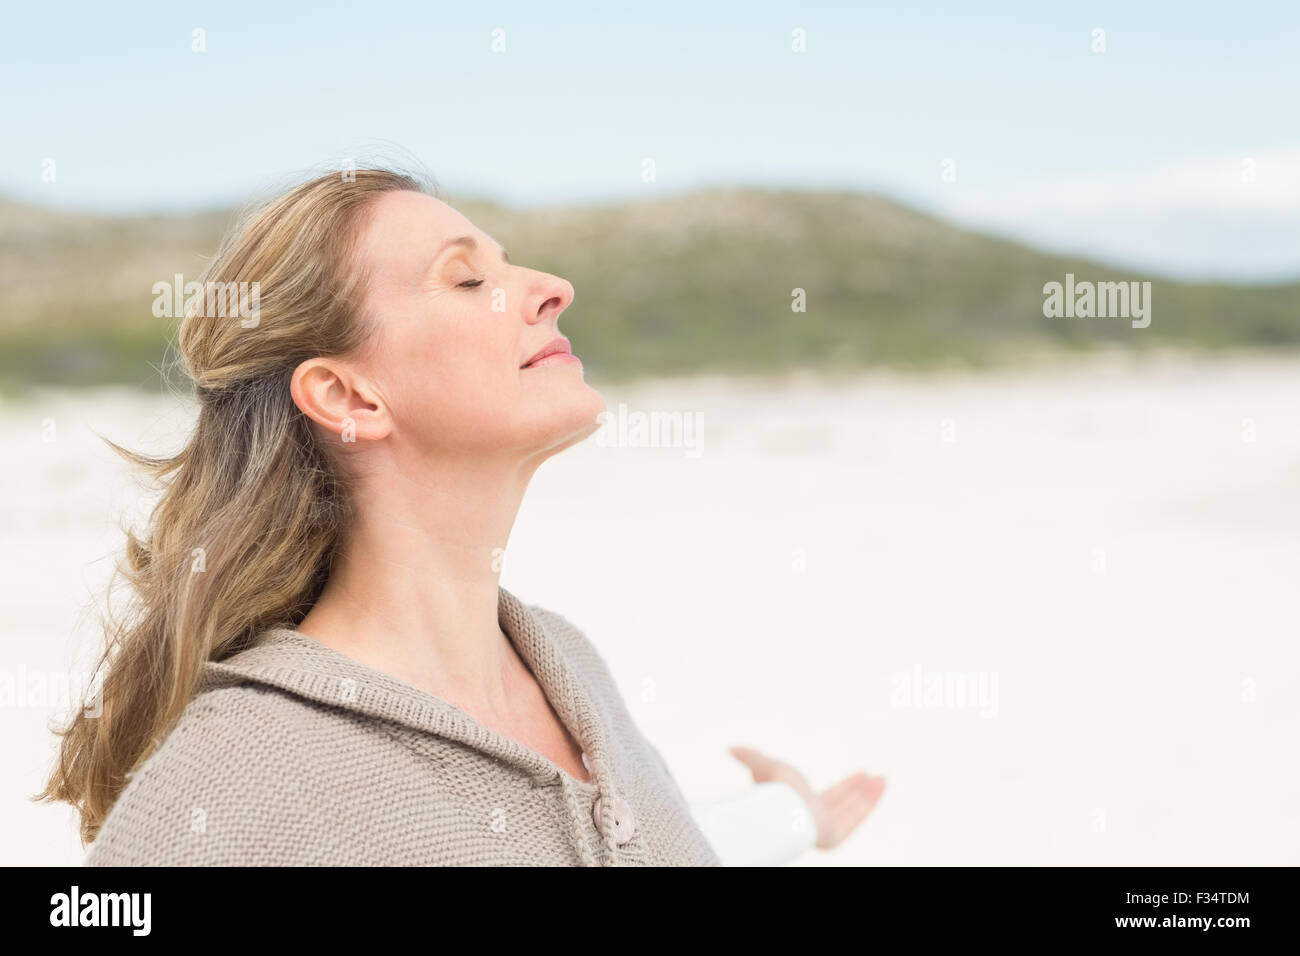 Smiling woman letting her hair down Stock Photo